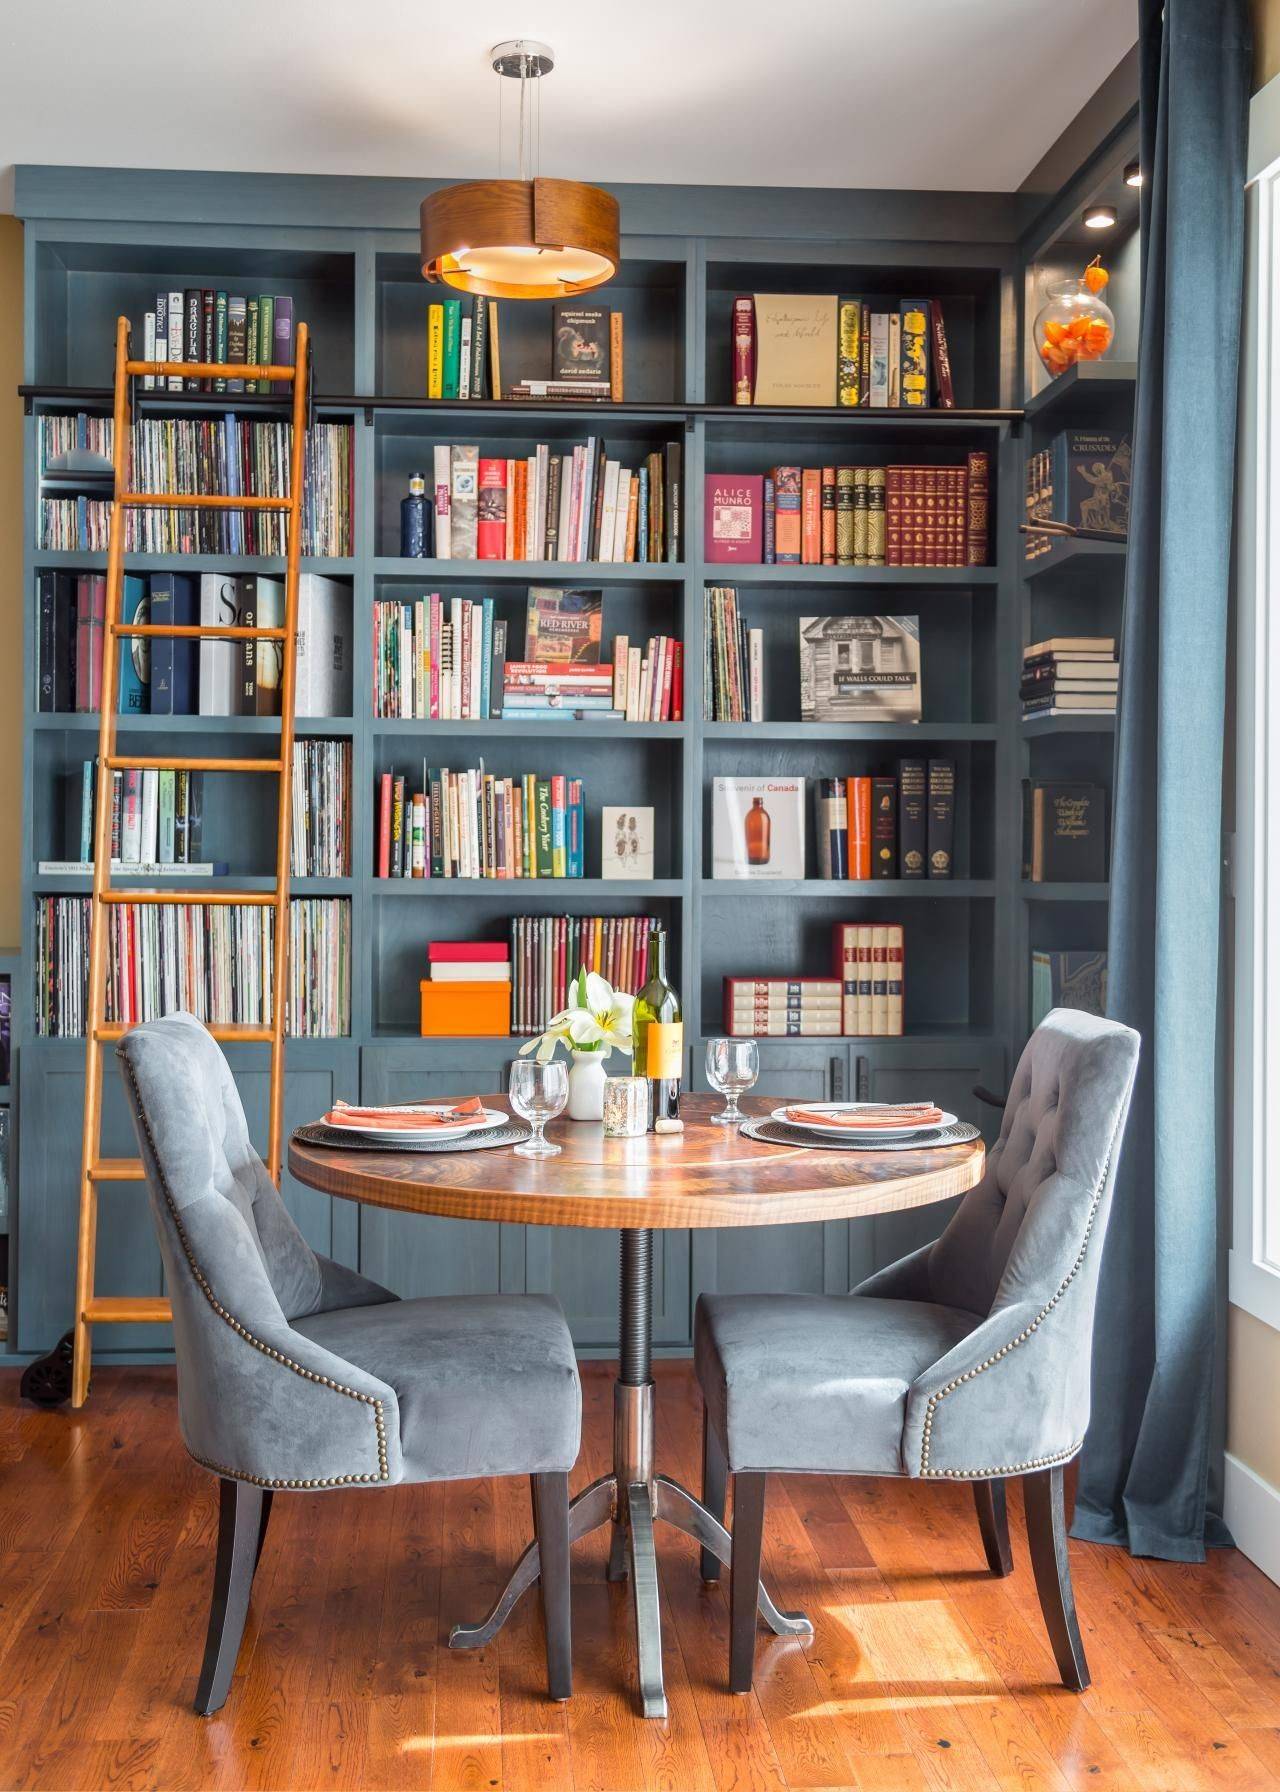 Cozy Breakfast Nooks That’ll Make You Never Want To Eat Out For
Brunch Again